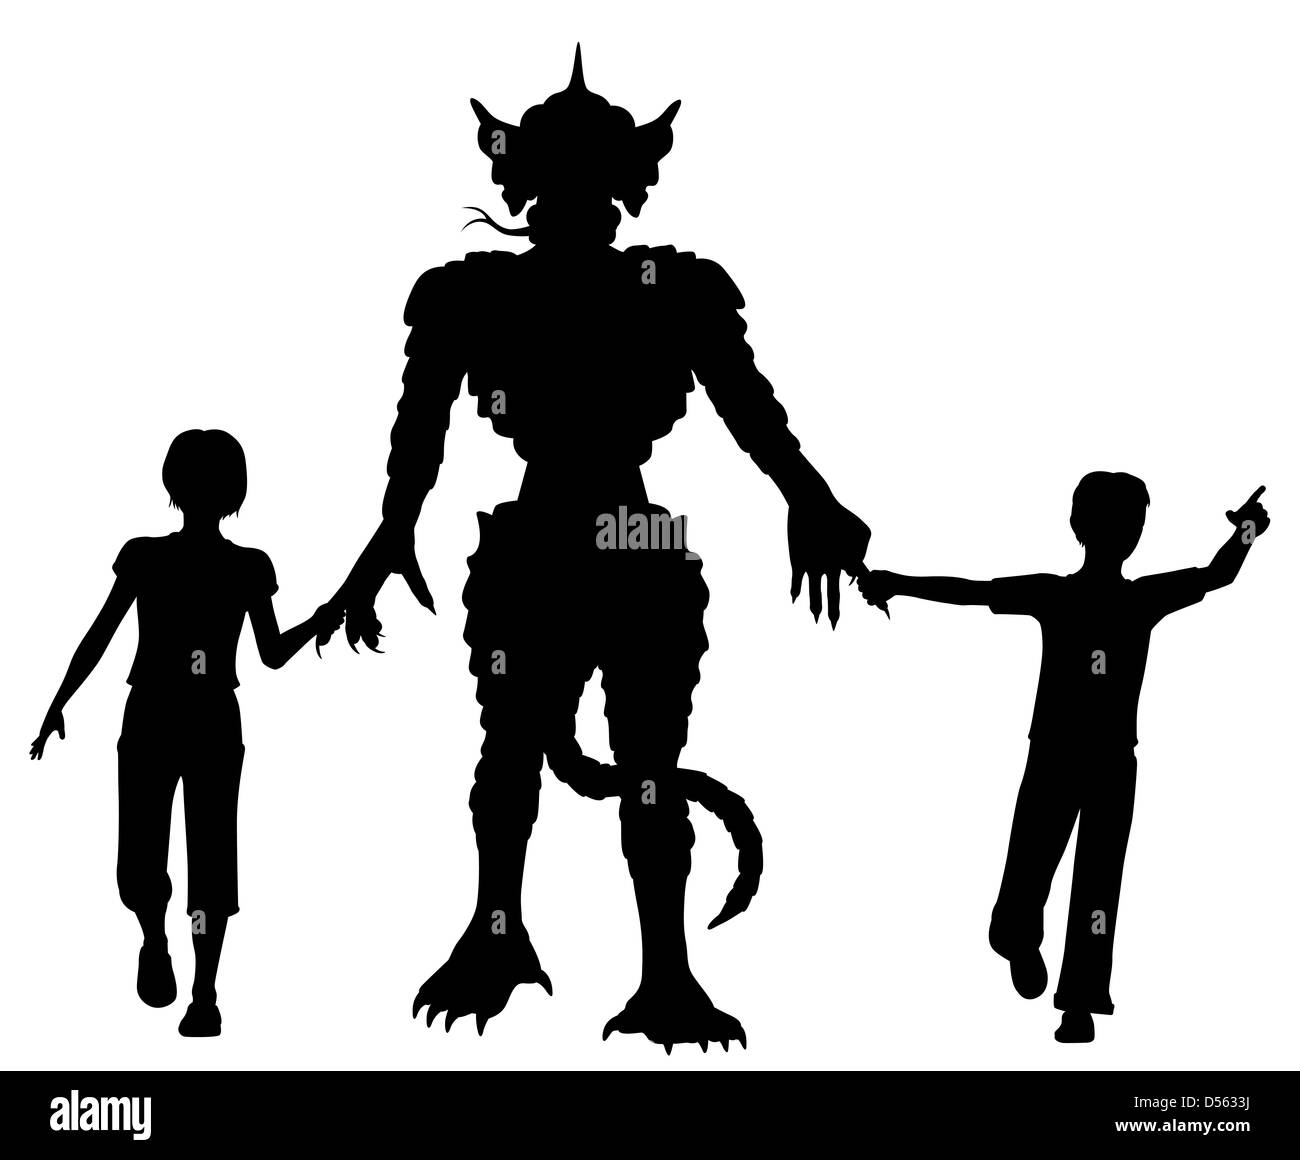 Illustrated silhouettes of two children leading a lizard monster by the hands Stock Photo